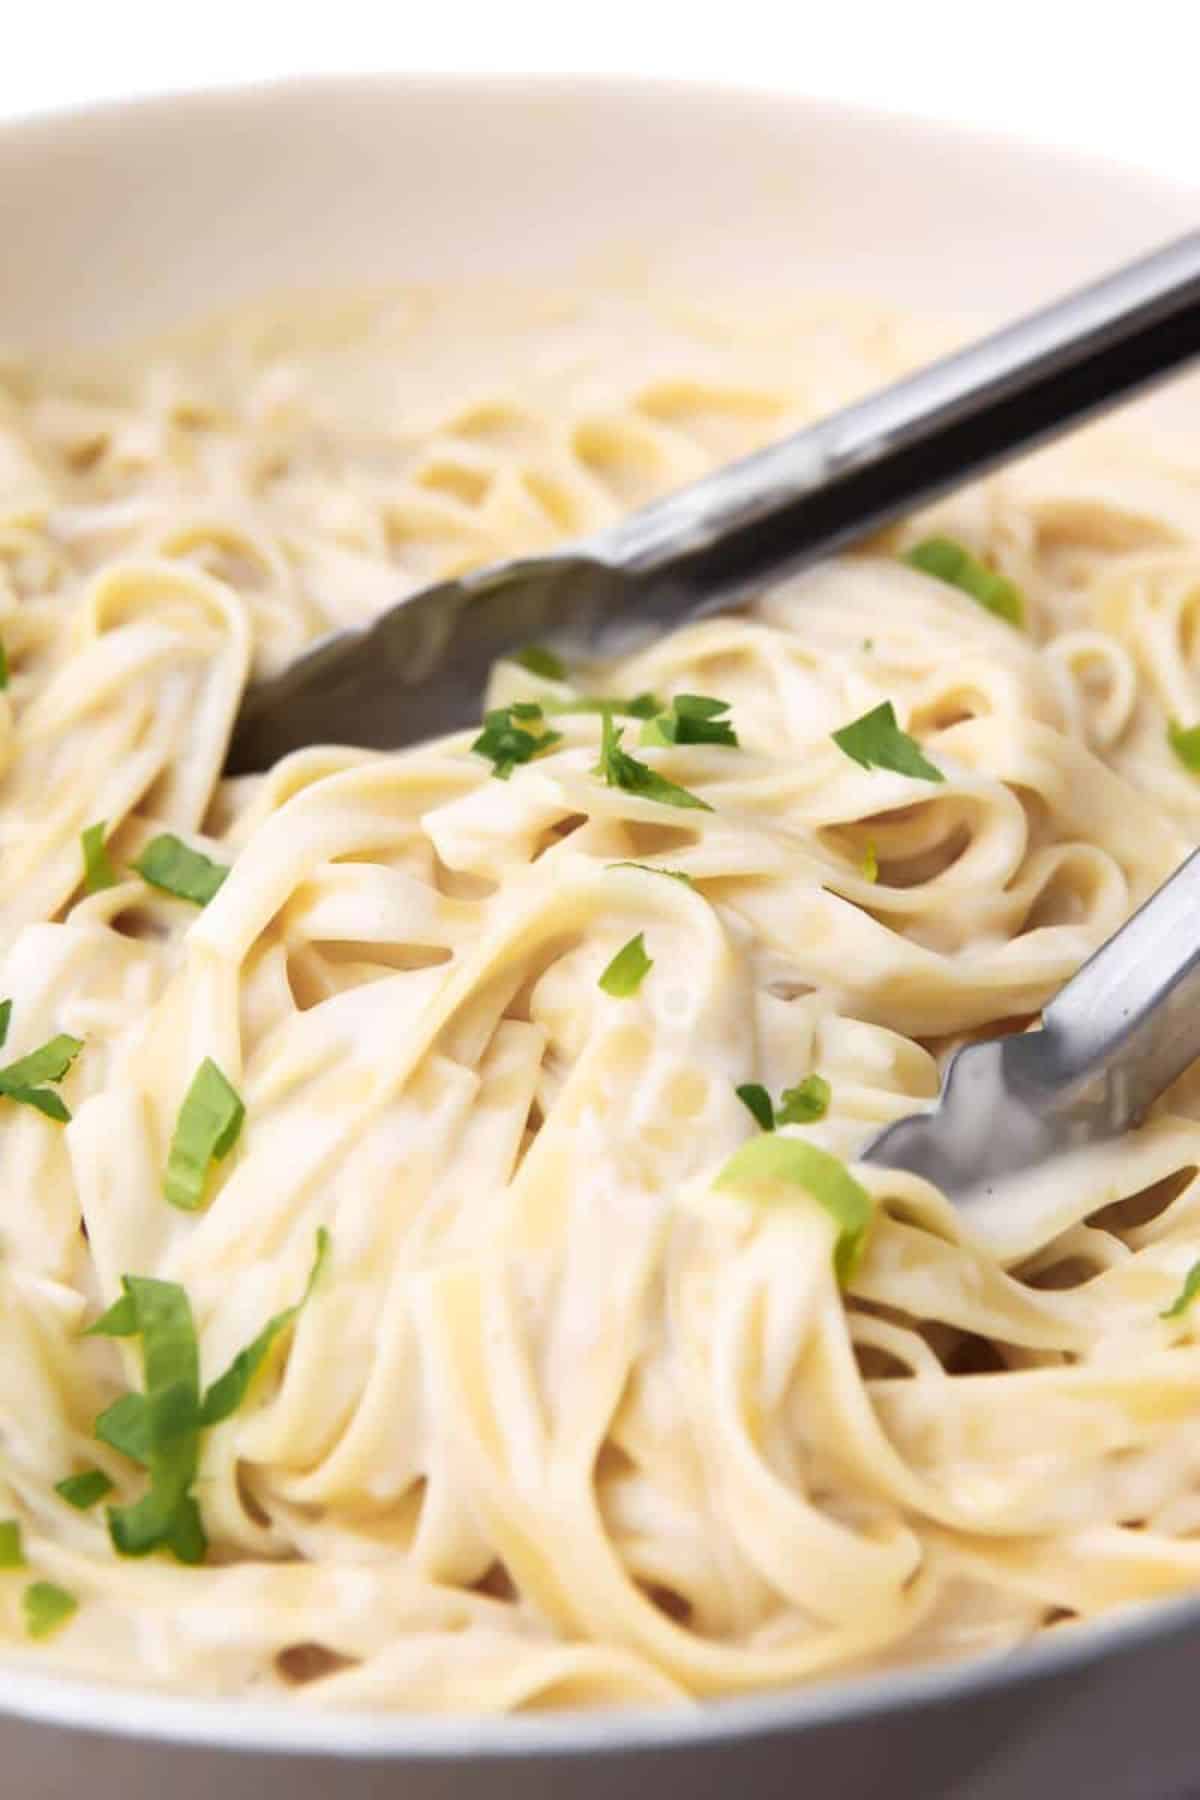 Deliicous pasta with Vegan Alfredo Sauce in a white bowl.